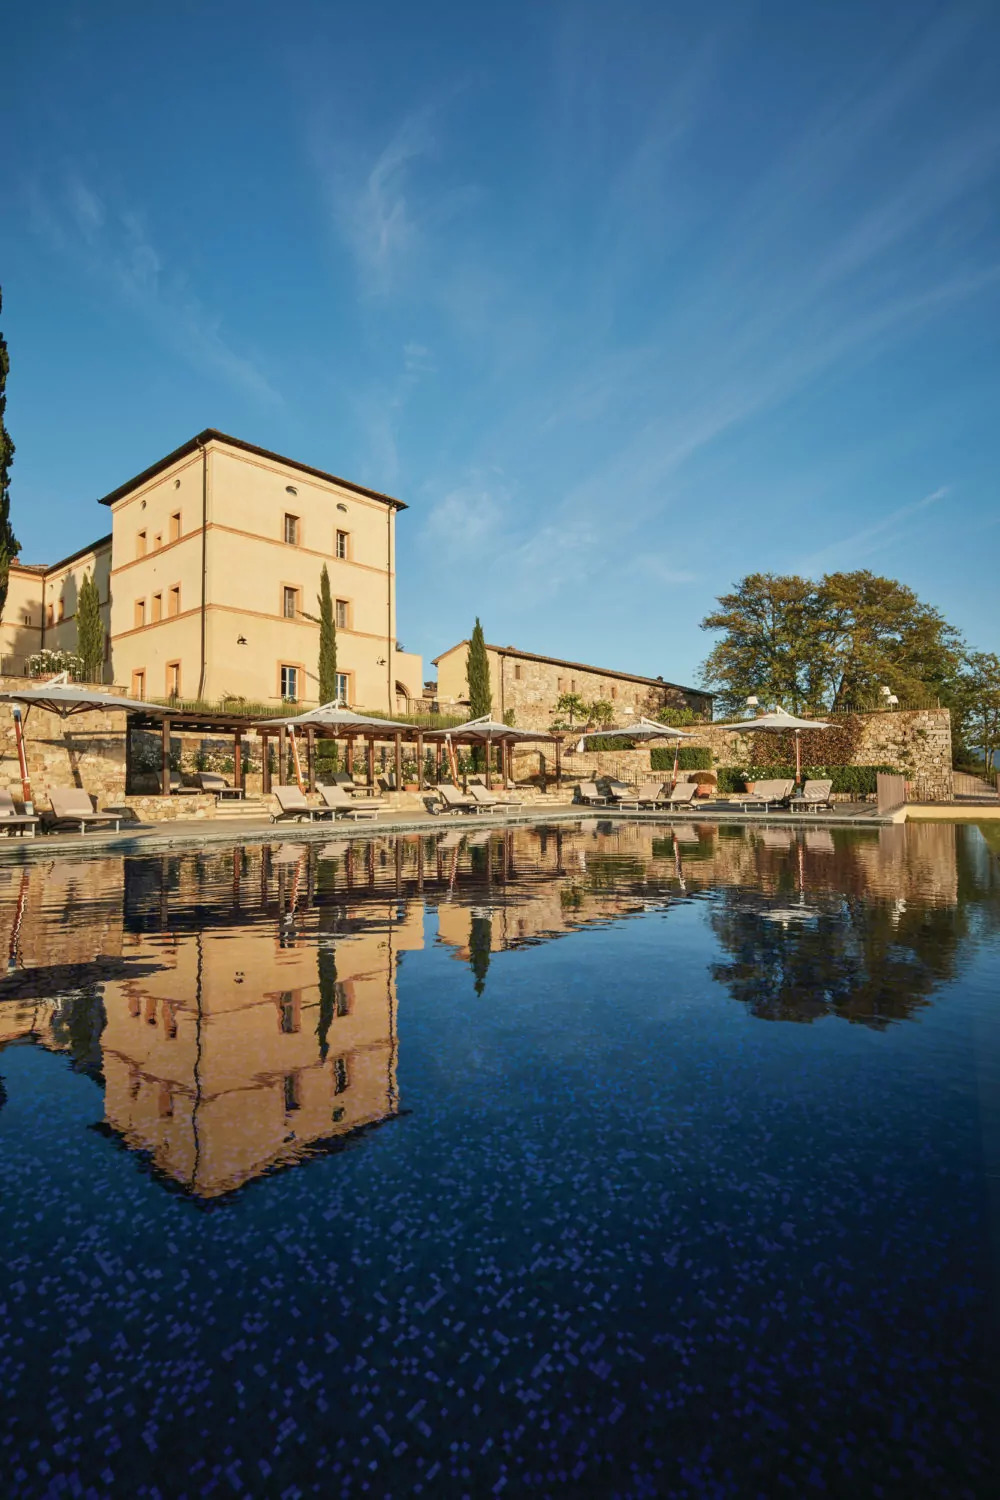 Discover one of the most storied Tuscany resorts, Castello di Casole